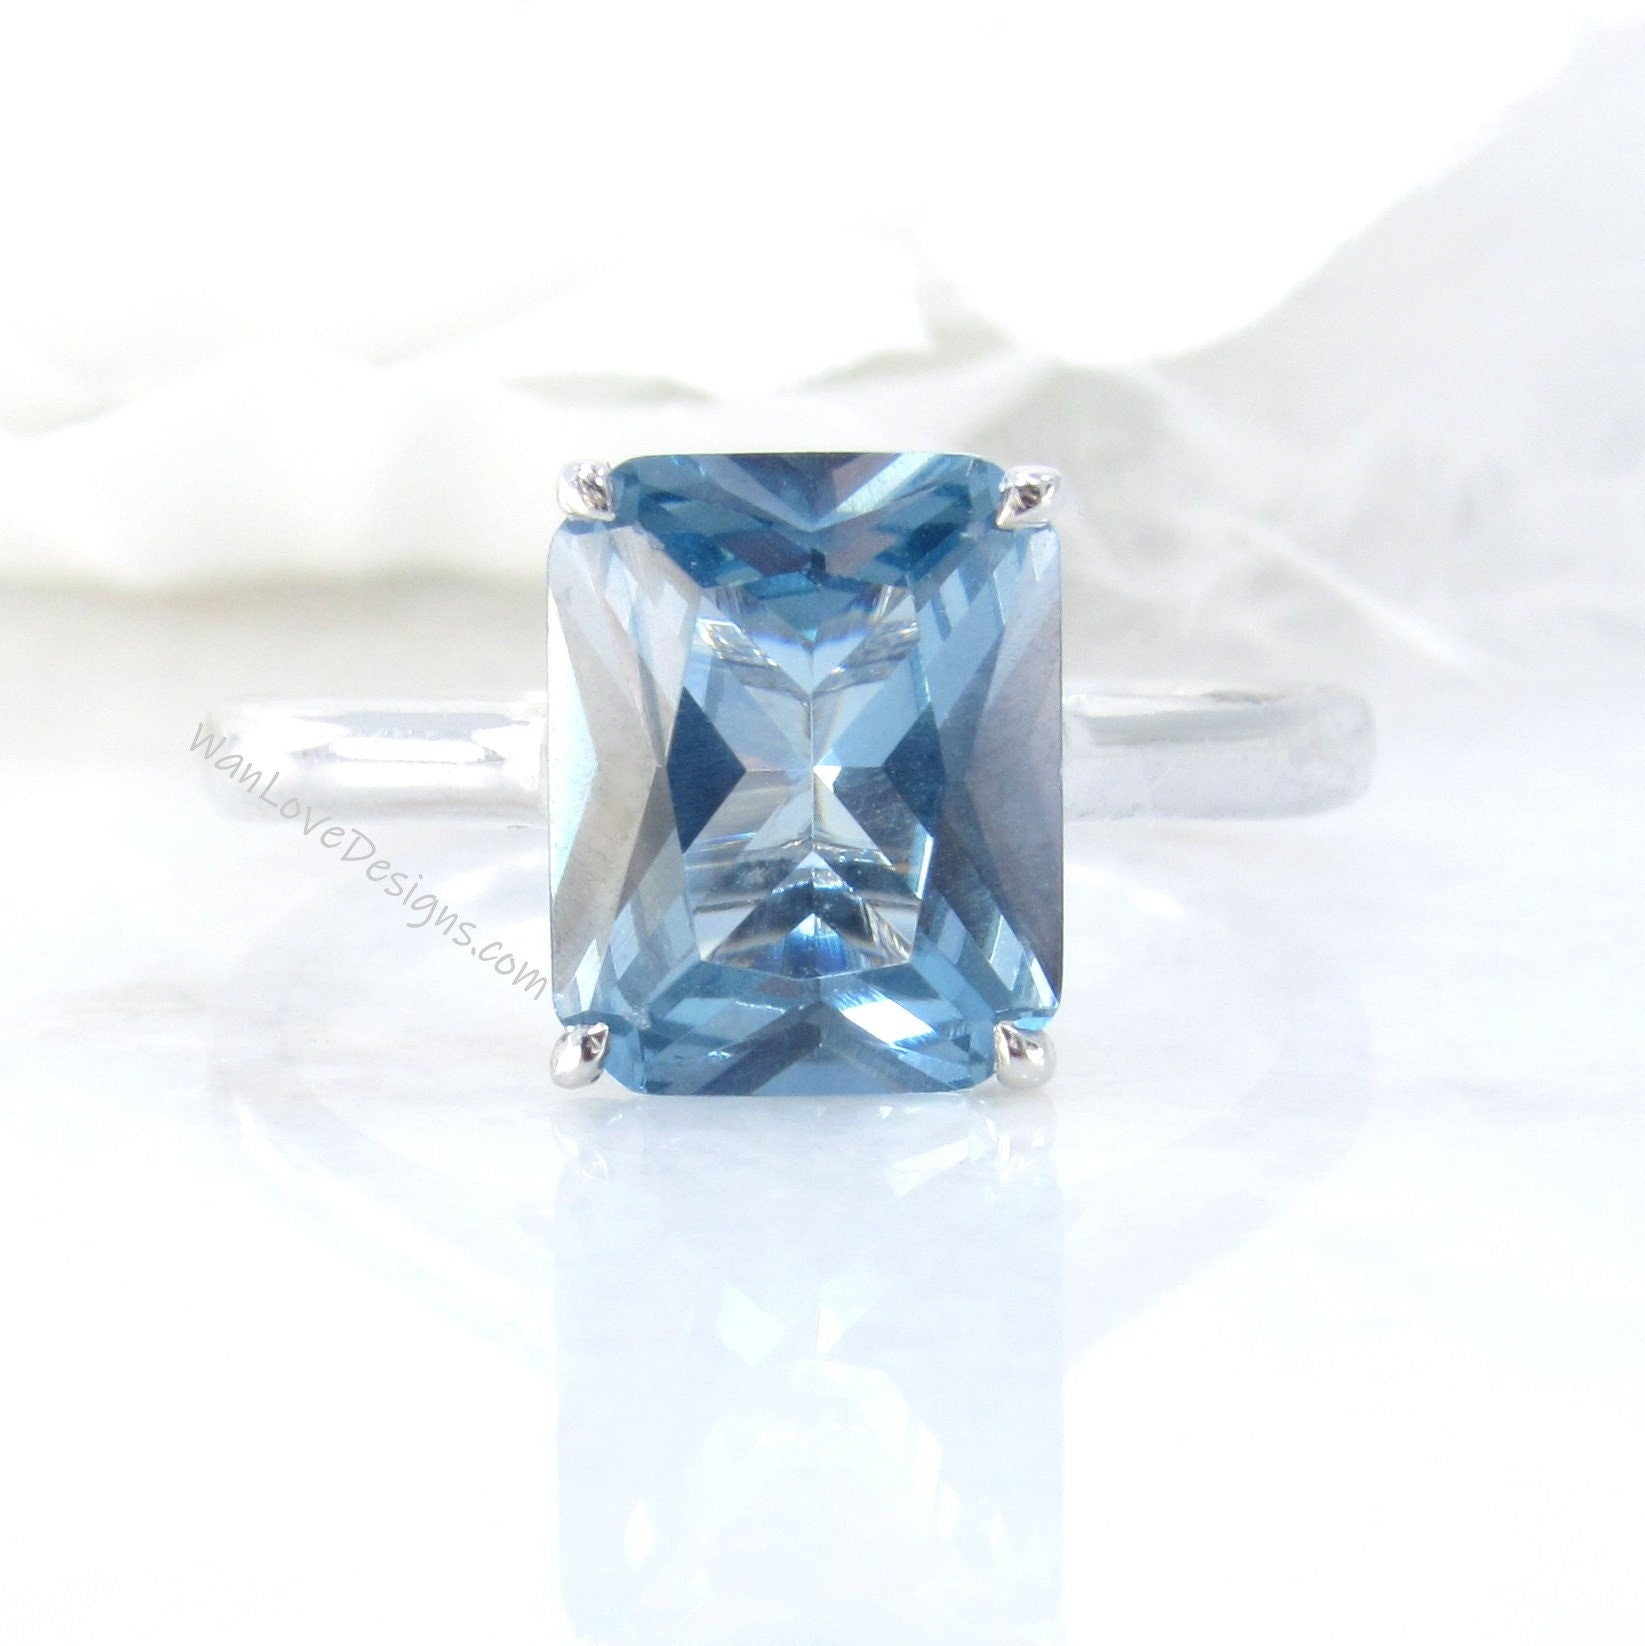 Aquamarine Light Blue Spinel Emerald cut Engagement Ring Solitaire Radiant 4ct 10x8mm promise bridal wedding Anniversary ring-Ready to ship Wan Love Designs